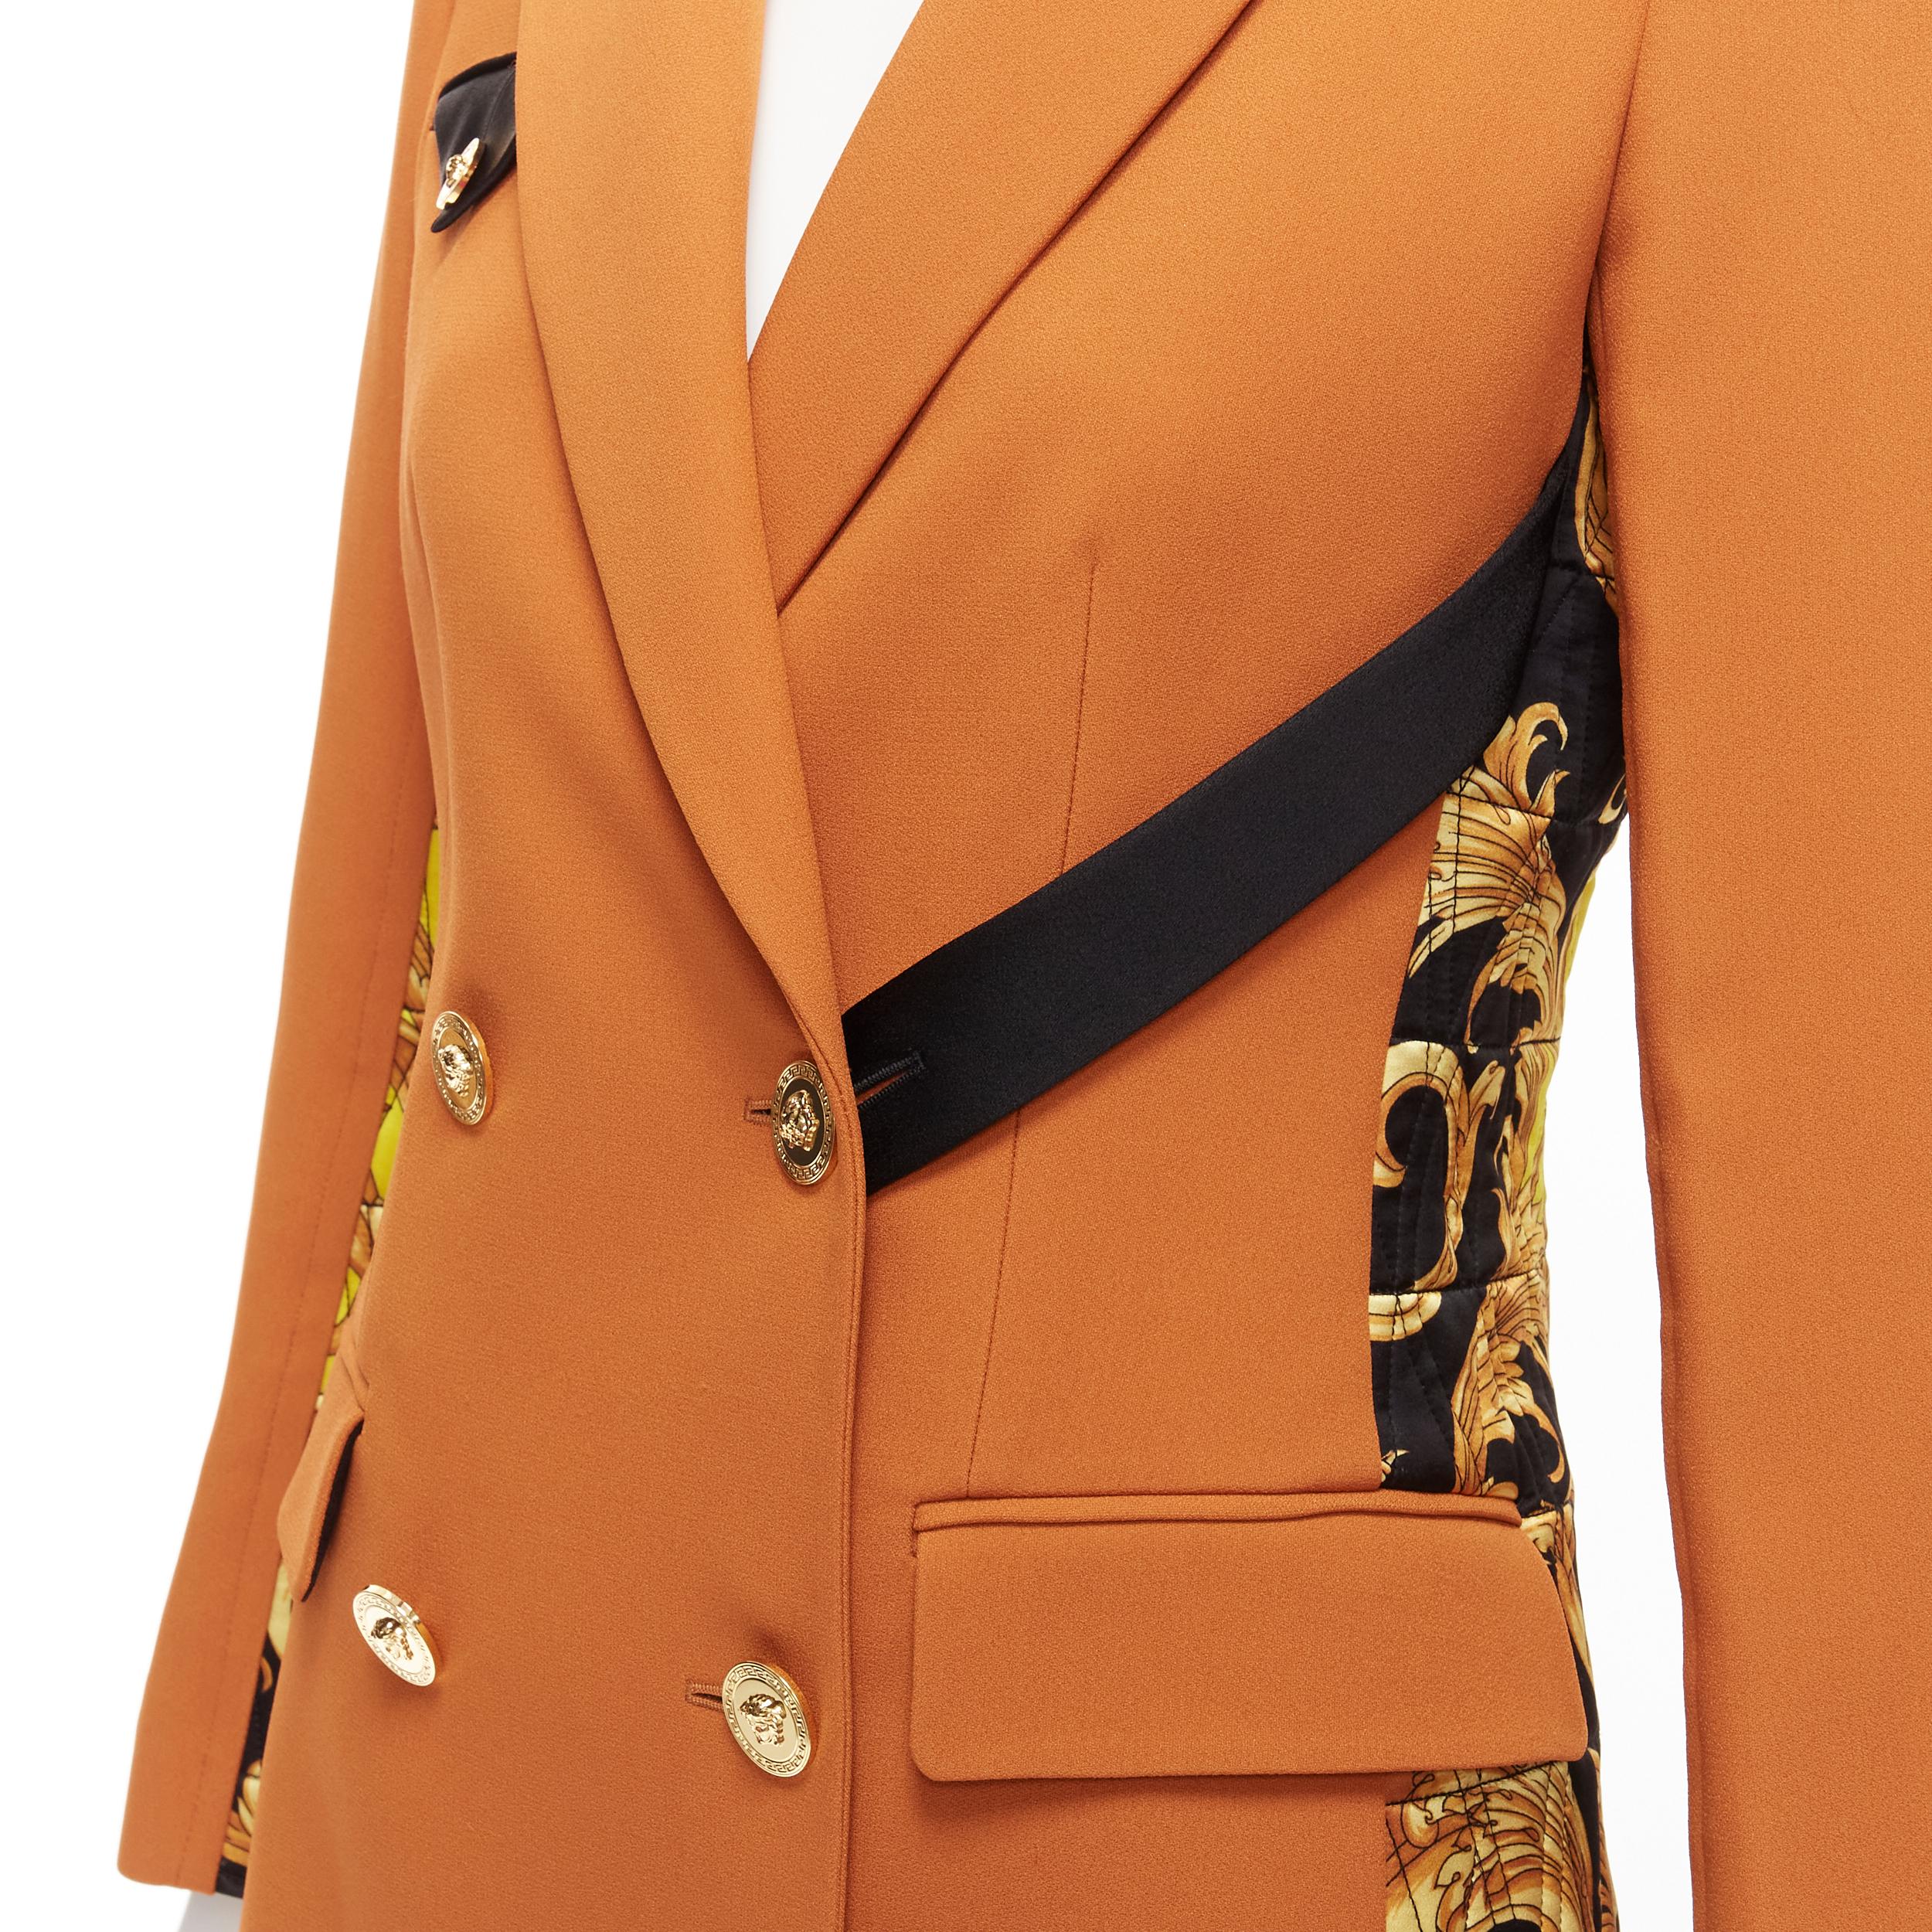 VERSACE Runway orange brown gold medusa quilted baroque print blazer jacket IT38 XS
Reference: CC/A00389
Brand: Versace
Designer: Donatella Versace
Collection: Runway
Material: Viscose, Blend
Color: Brown, Yellow
Pattern: Barocco
Closure: